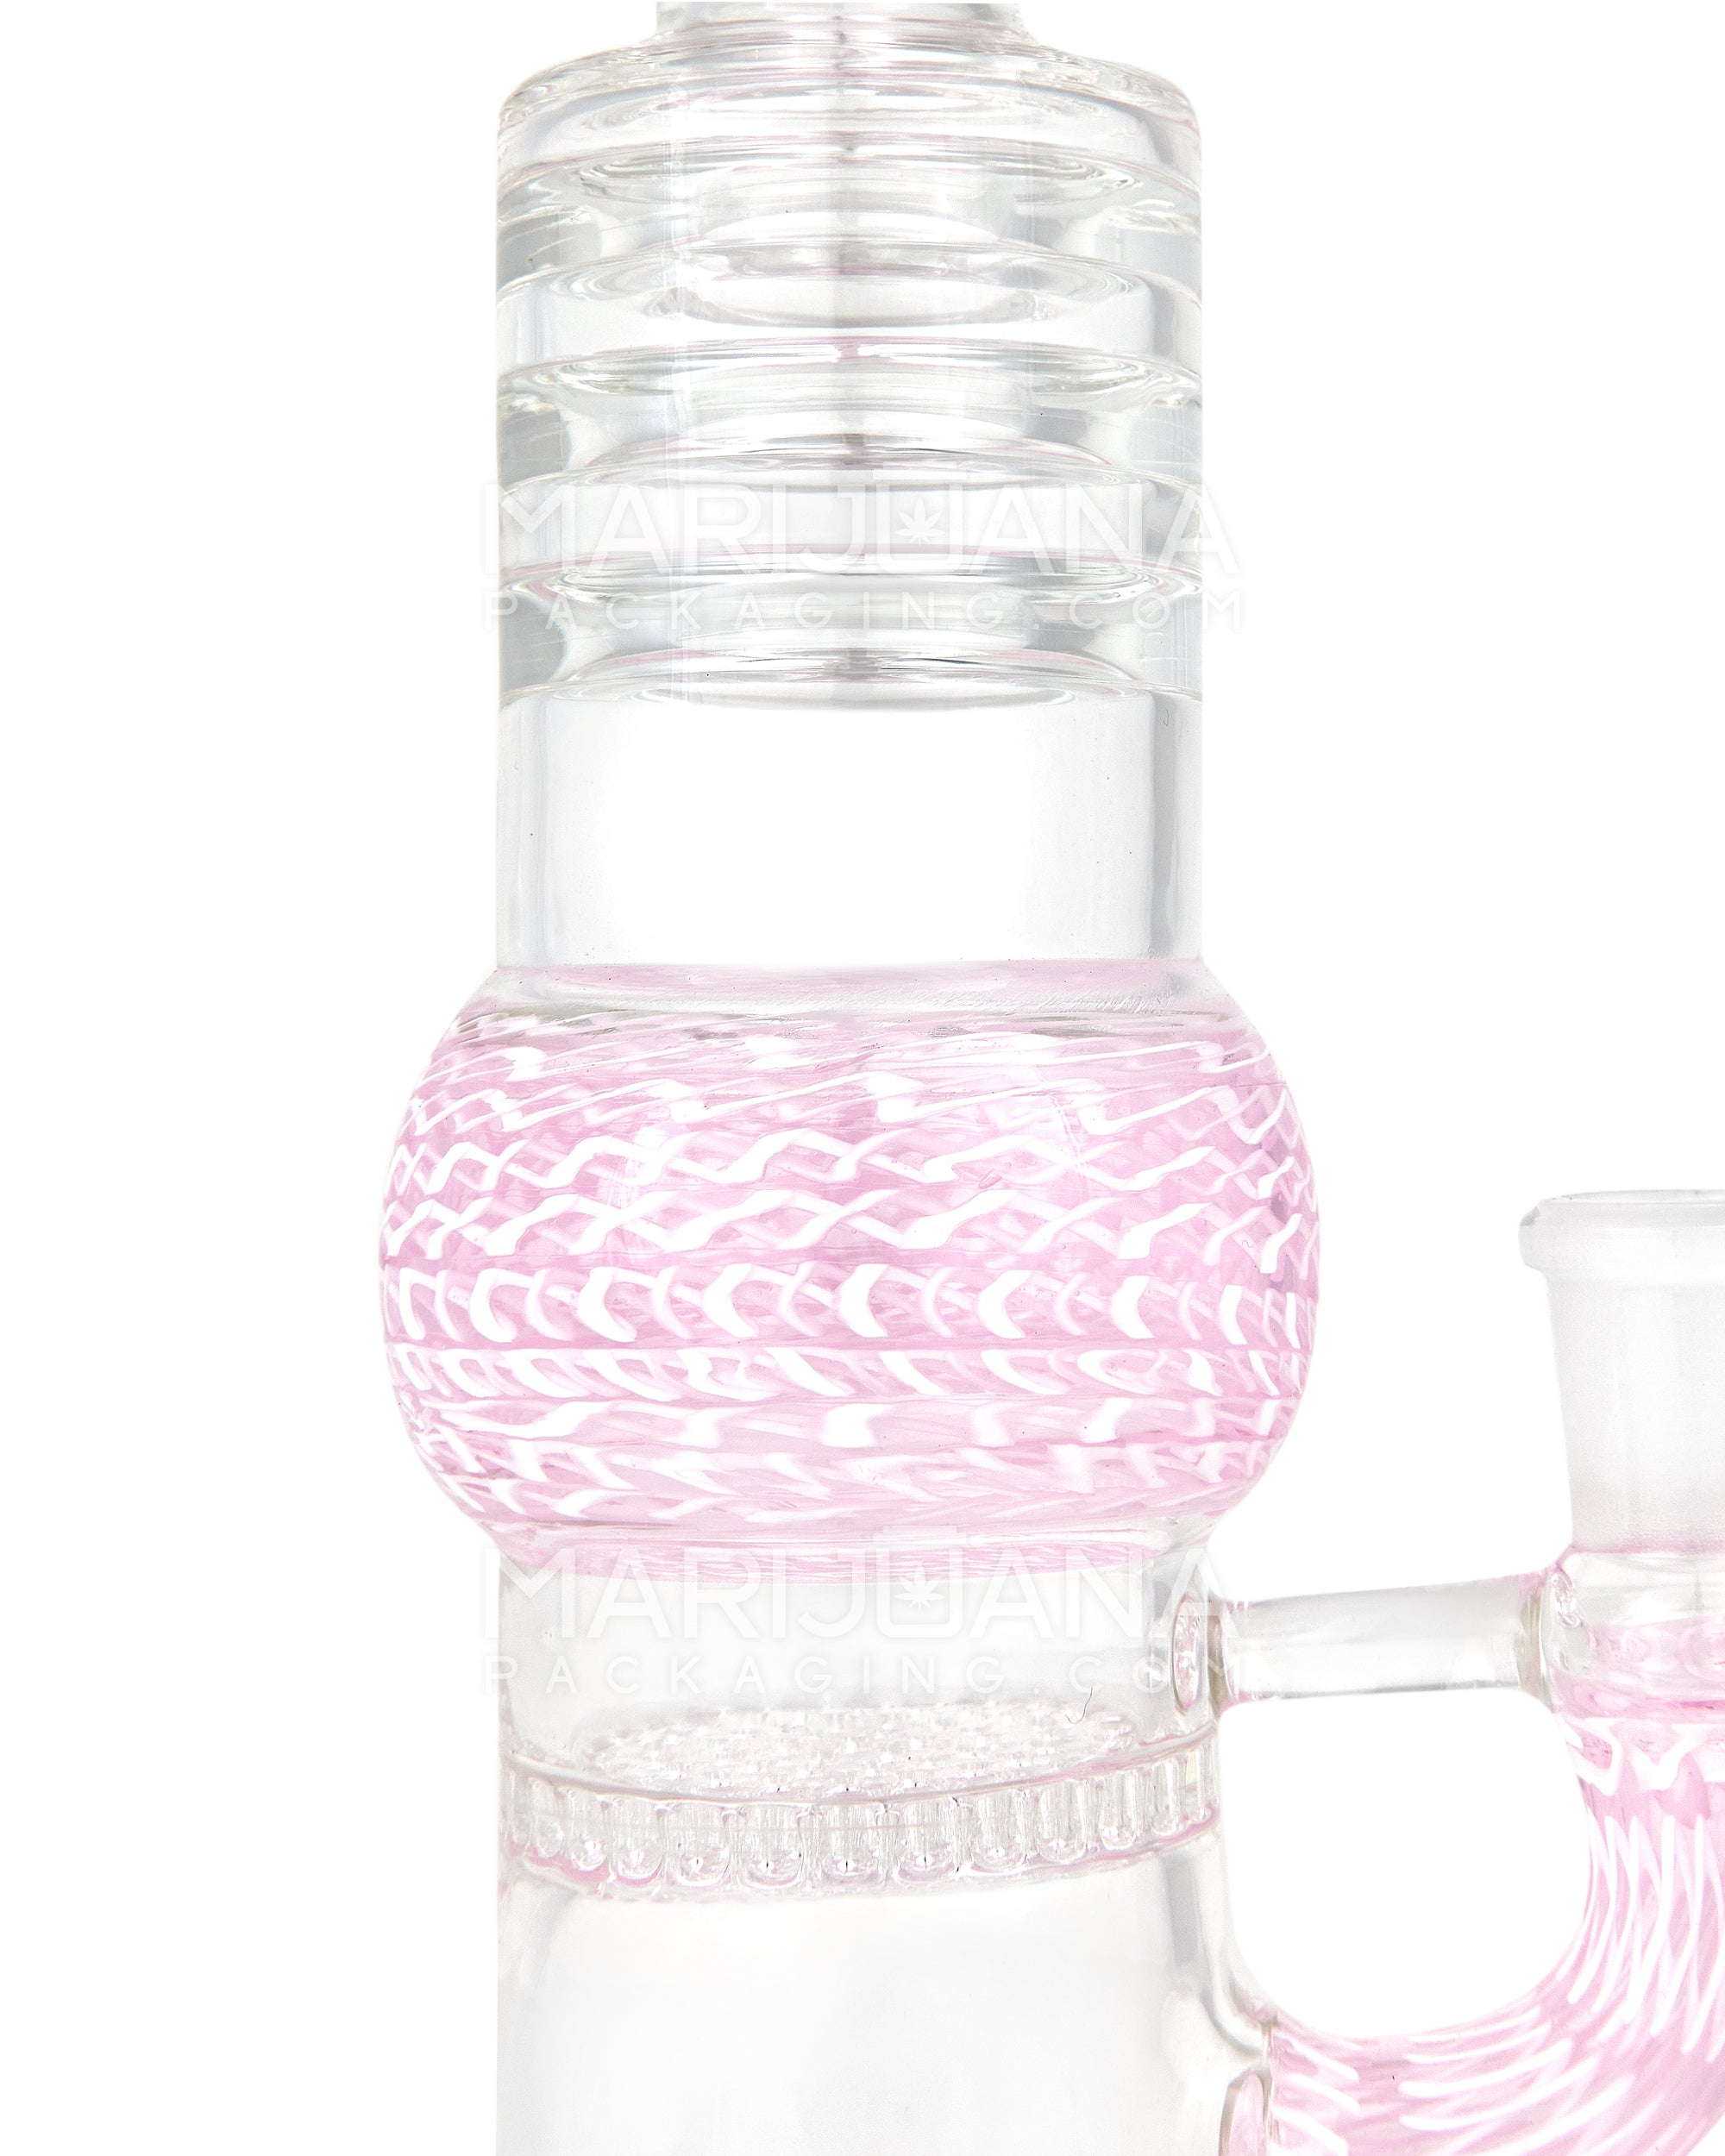 Straight Neck Honeycomb Perc Zanfirico Glass Water Pipe w/ Ice Catcher | 11in Tall - 14mm Bowl - Pink - 5